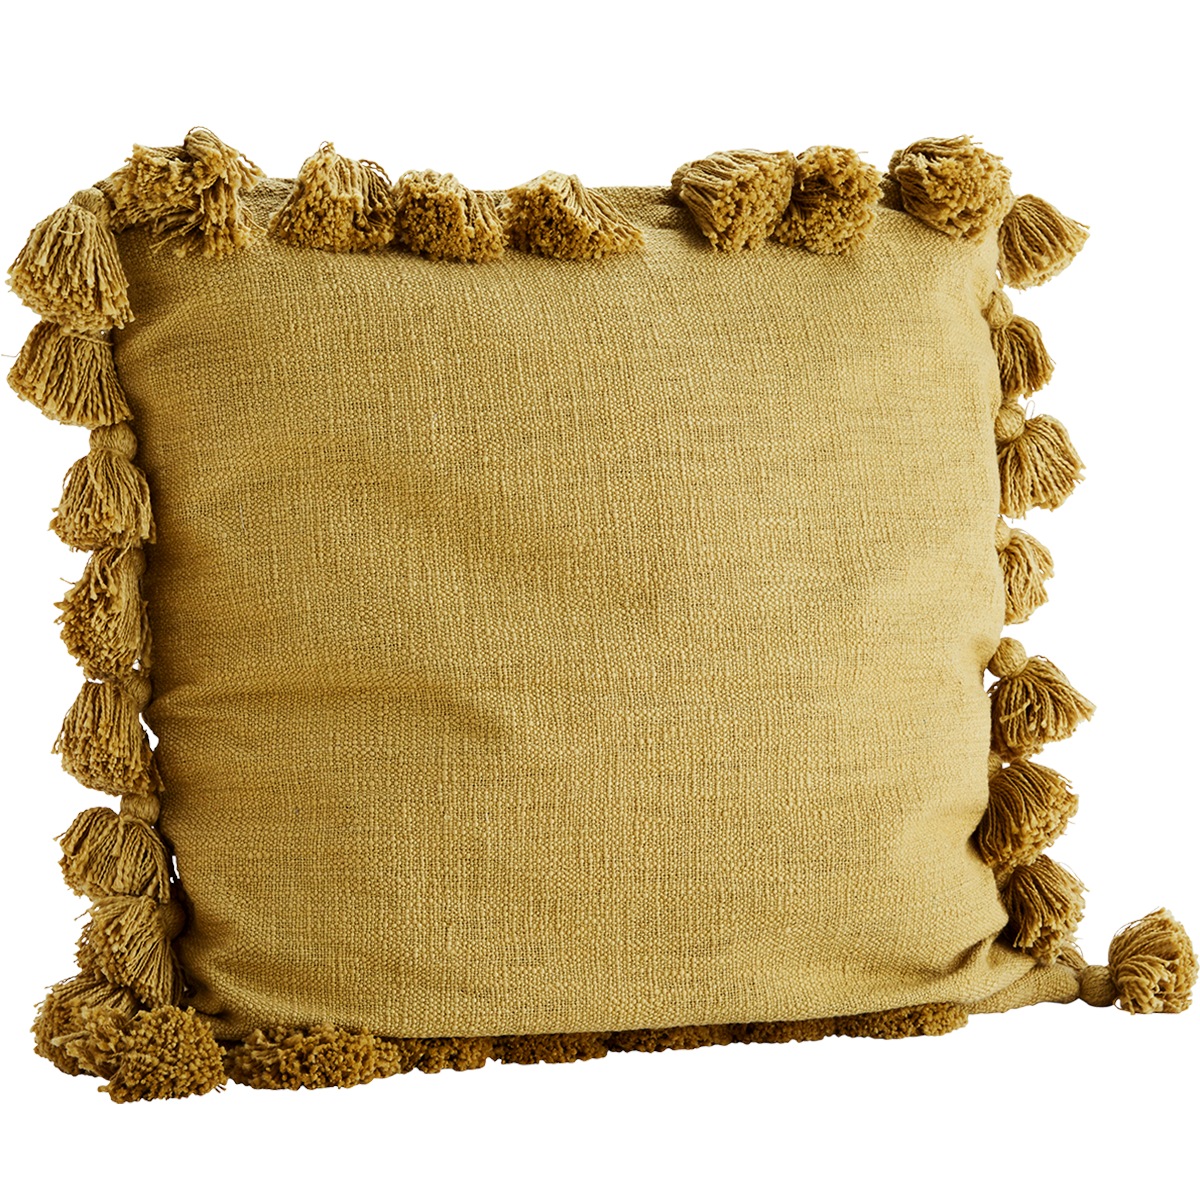 Cushion cover with tassels 60x60 cm, Mustard